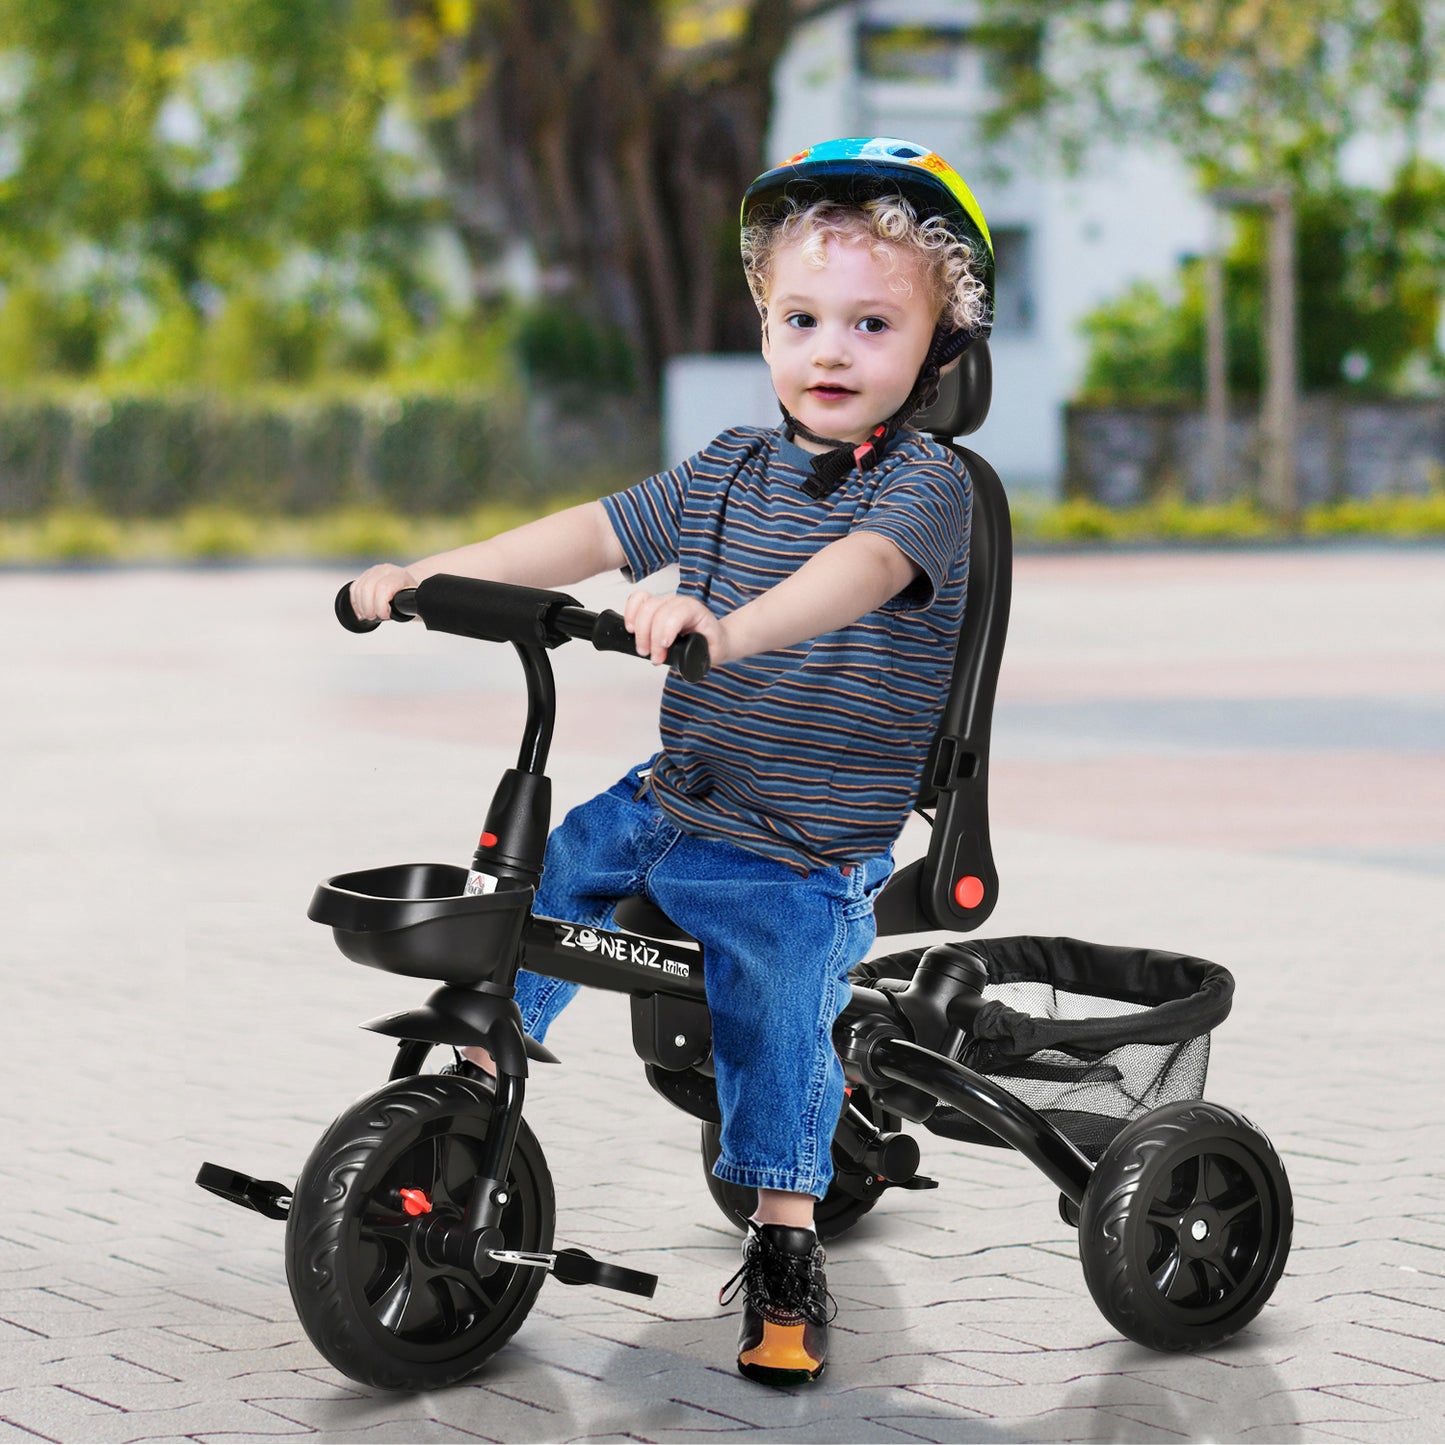 HOMCOM 4 in 1 Baby Tricycle Toddler Stroller Foldable Pedal Tricycle w/ Reversible Angle Adjustable Seat Removable for 1-5 Years - Grey